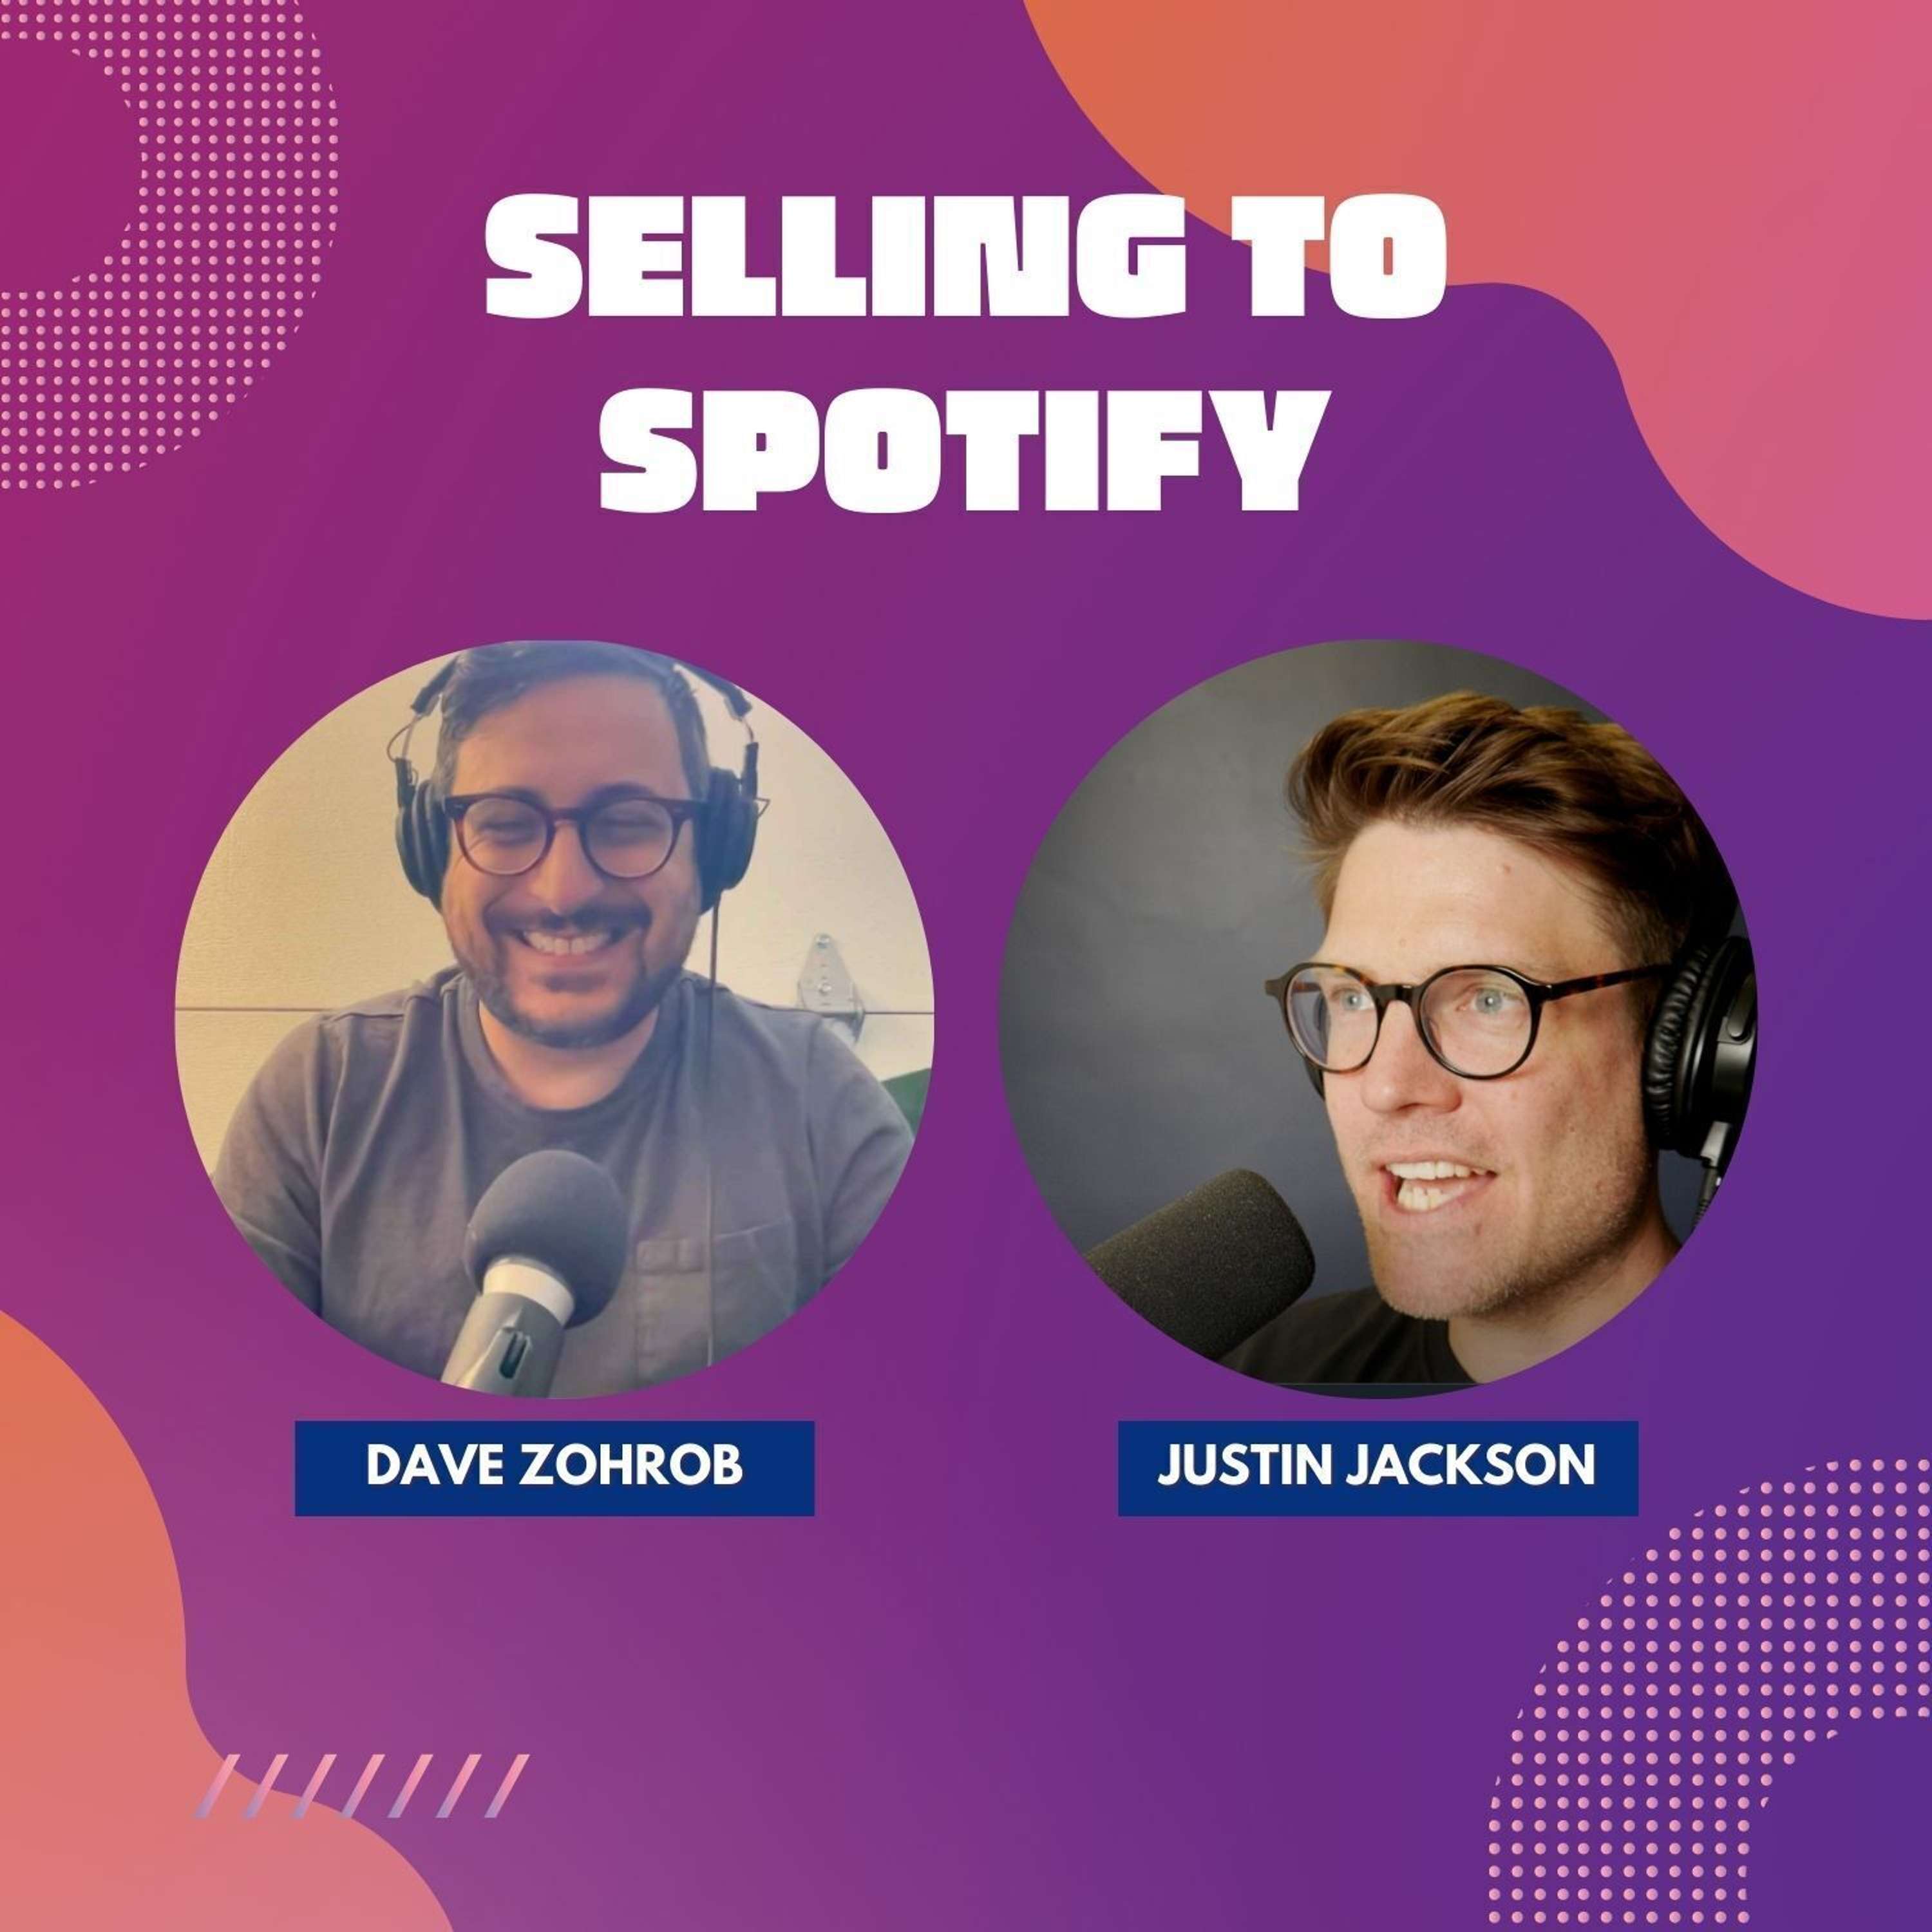 What’s it like getting acquired by Spotify? (Dave Zohrob from Chartable)